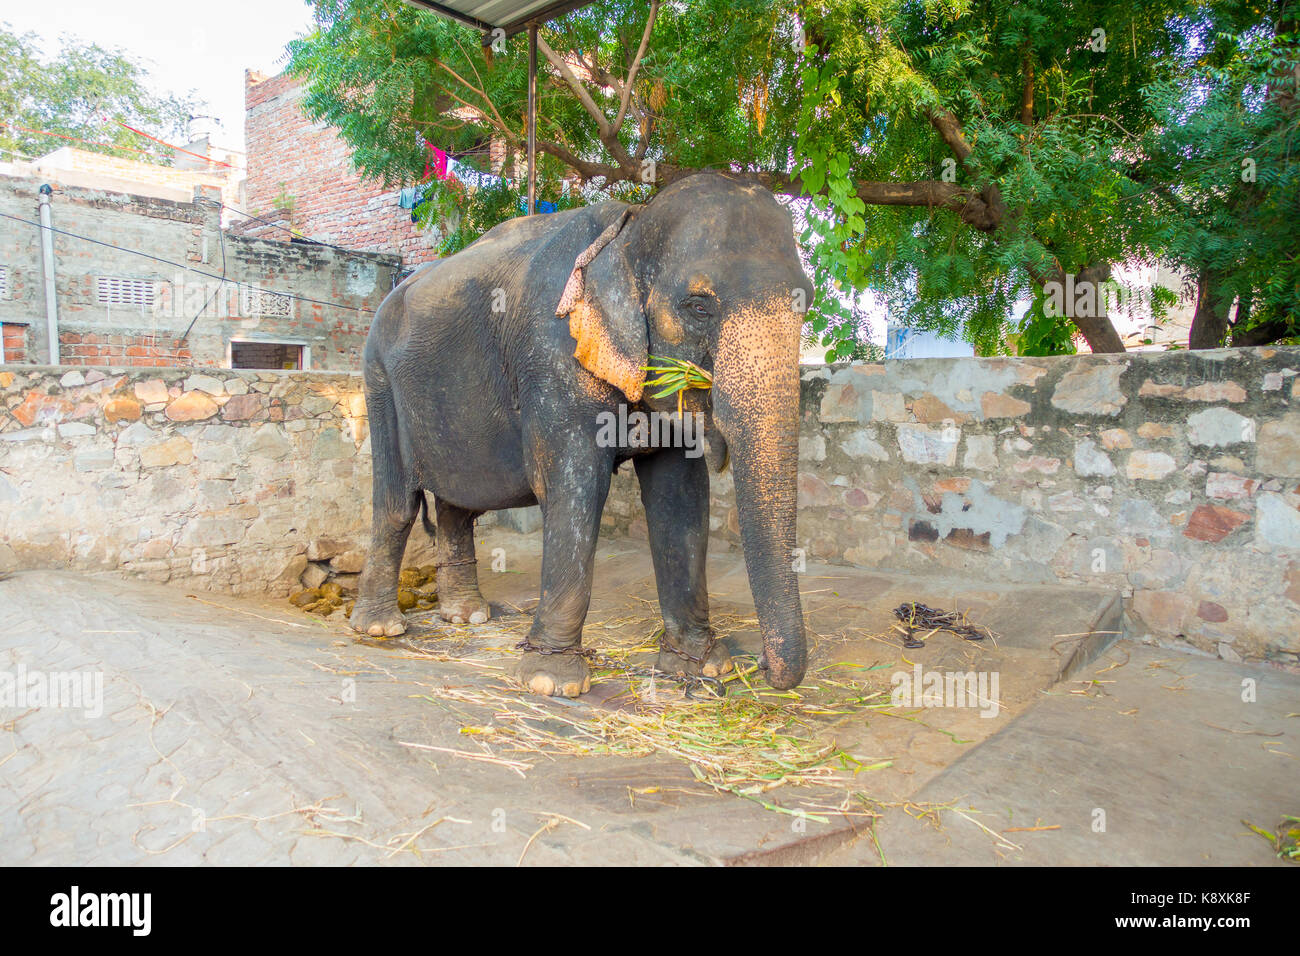 Beautiful an huge elephant with a chain in his feet in Jaipur, India. Elephants are used for rides and other tourist activities in Jaipur Stock Photo